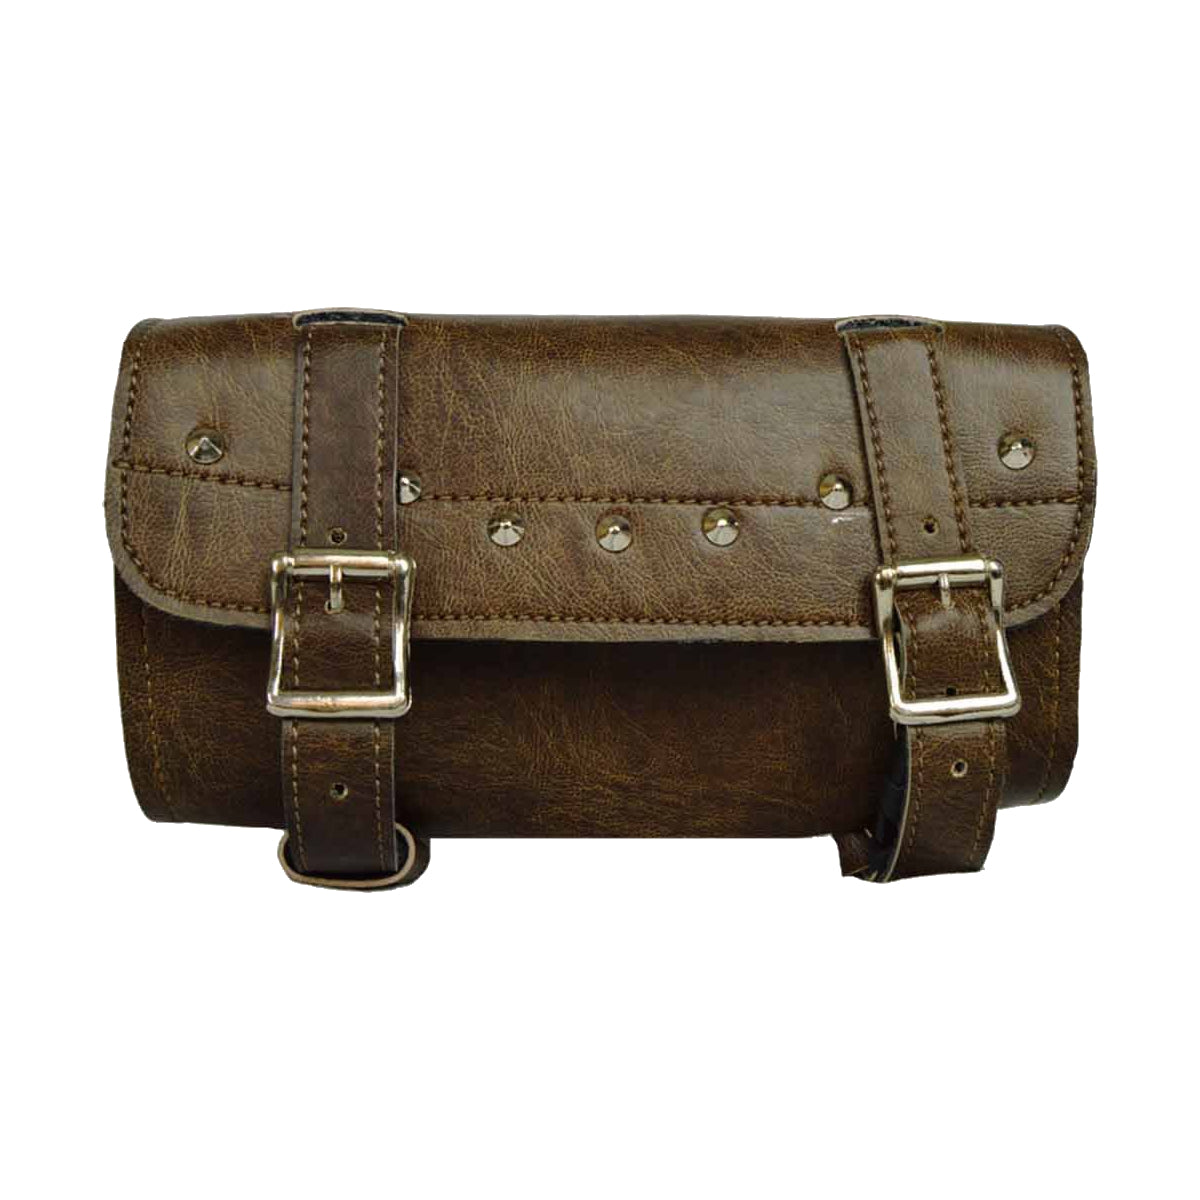 Vance Leather Distressed Brown Two Strap Tool Bag with Quick Releases, Studded